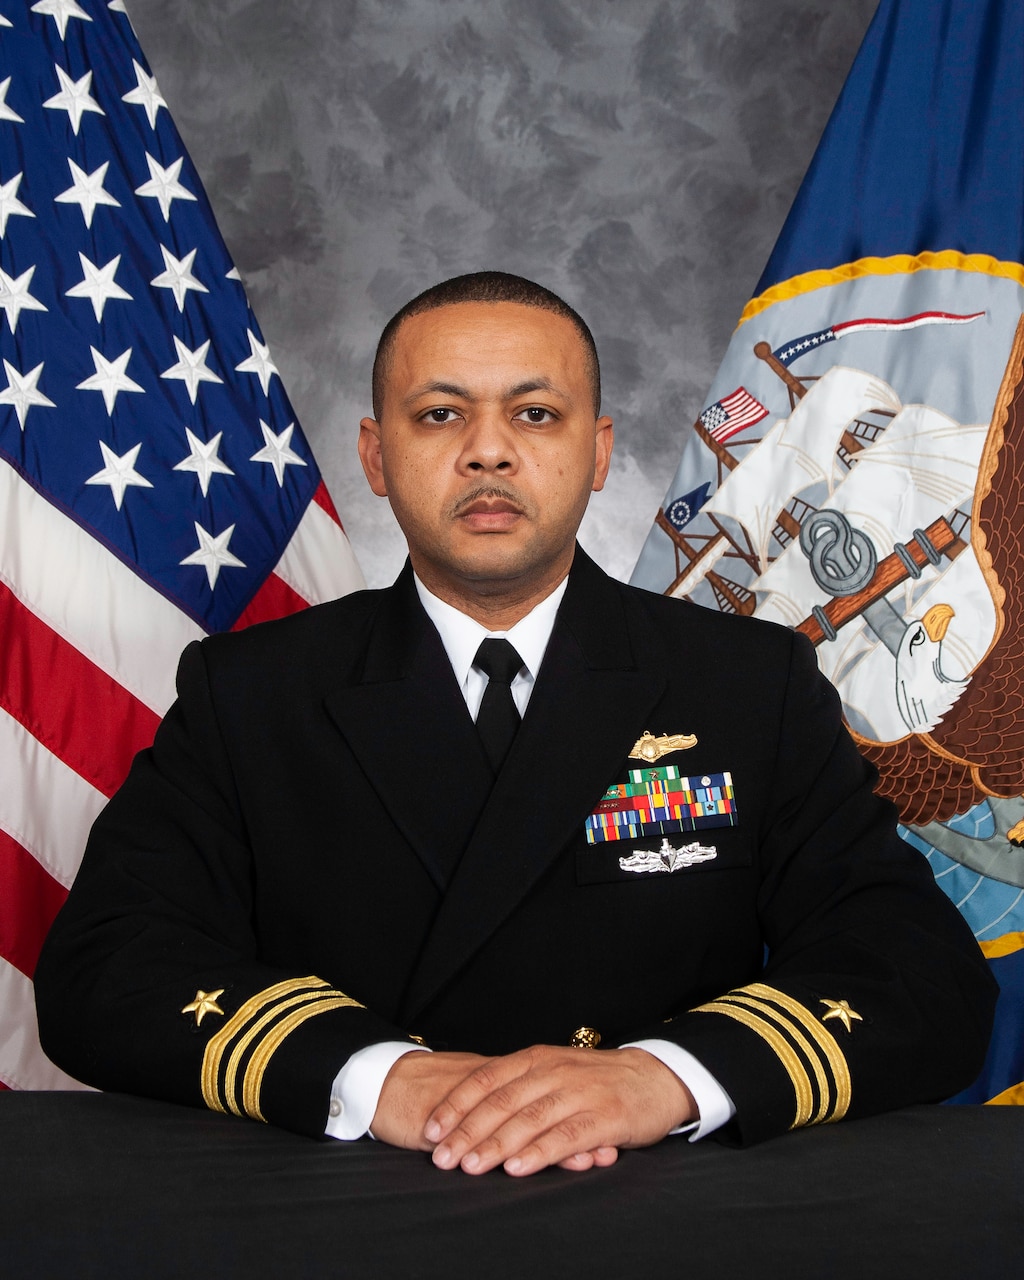 Lt. Cmdr. Eugene T. Frye, OFFICER IN CHARGE, Naval Computer and Telecommunications Station (NCTS) Diego Garcia